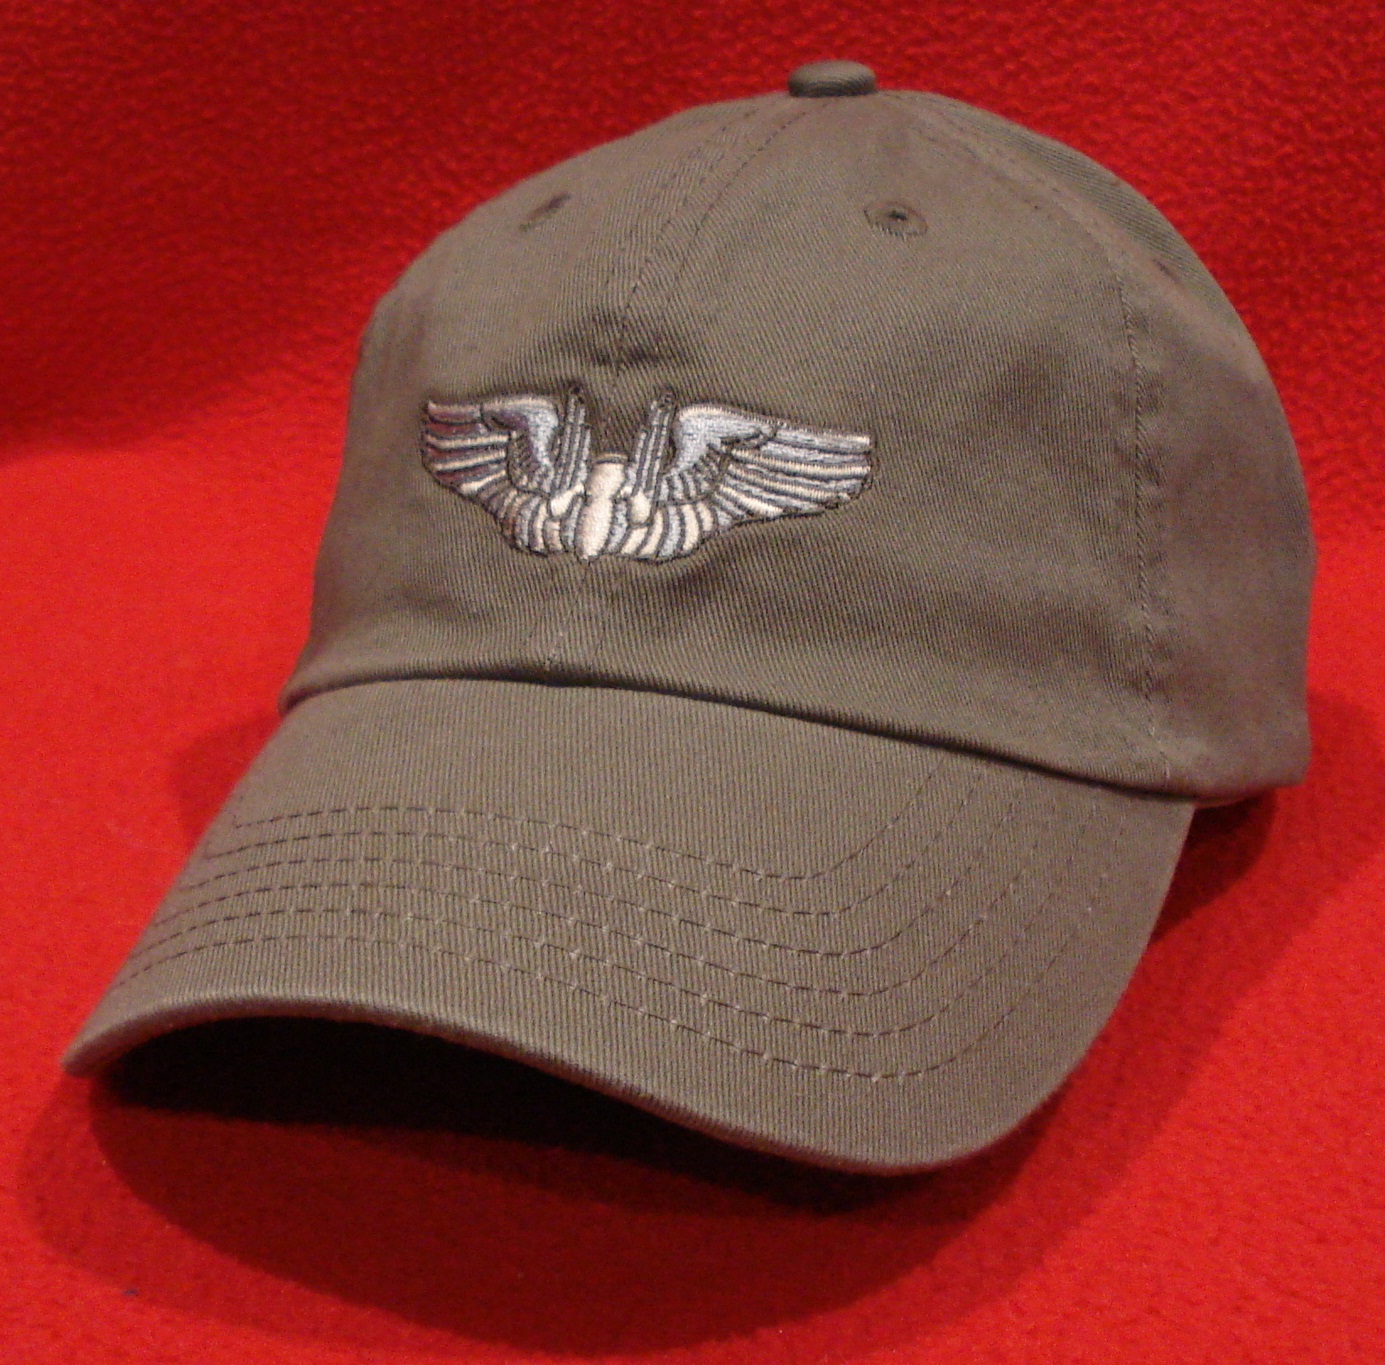 NAVAL AIR CREW Aviator Wings Ball Cap Stone/tan low-profile embroidered hat 